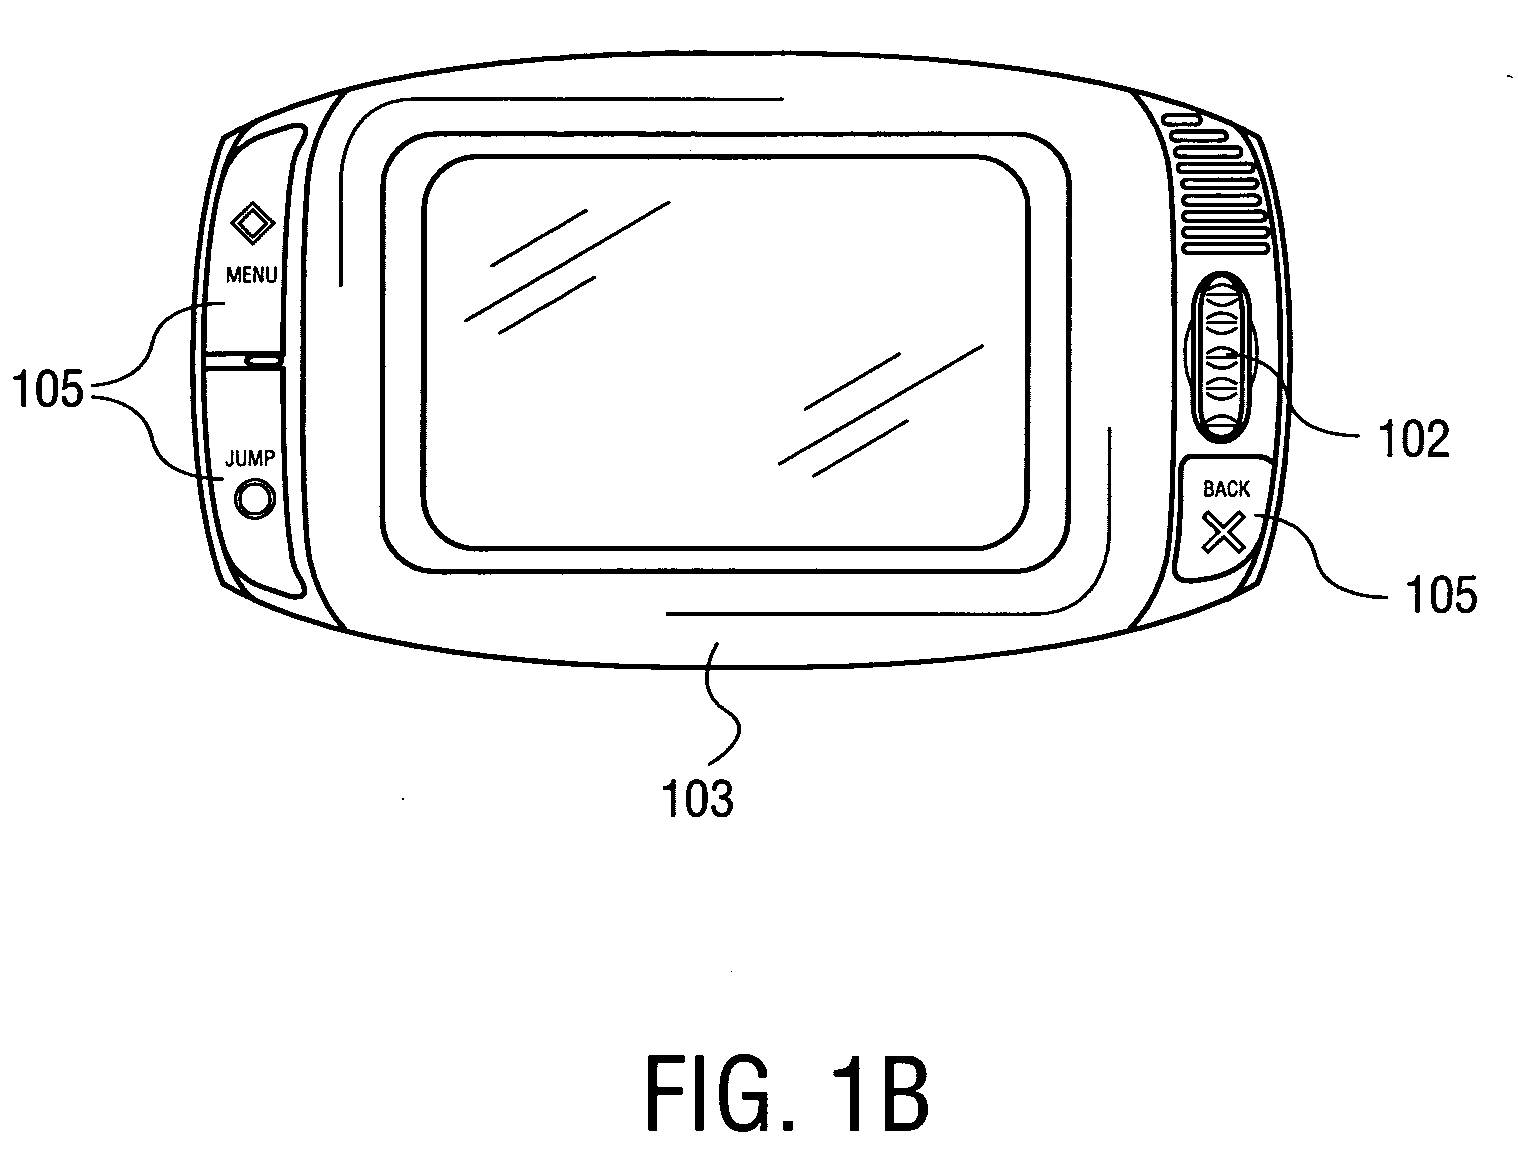 System and method for collecting debug data from a wireless device